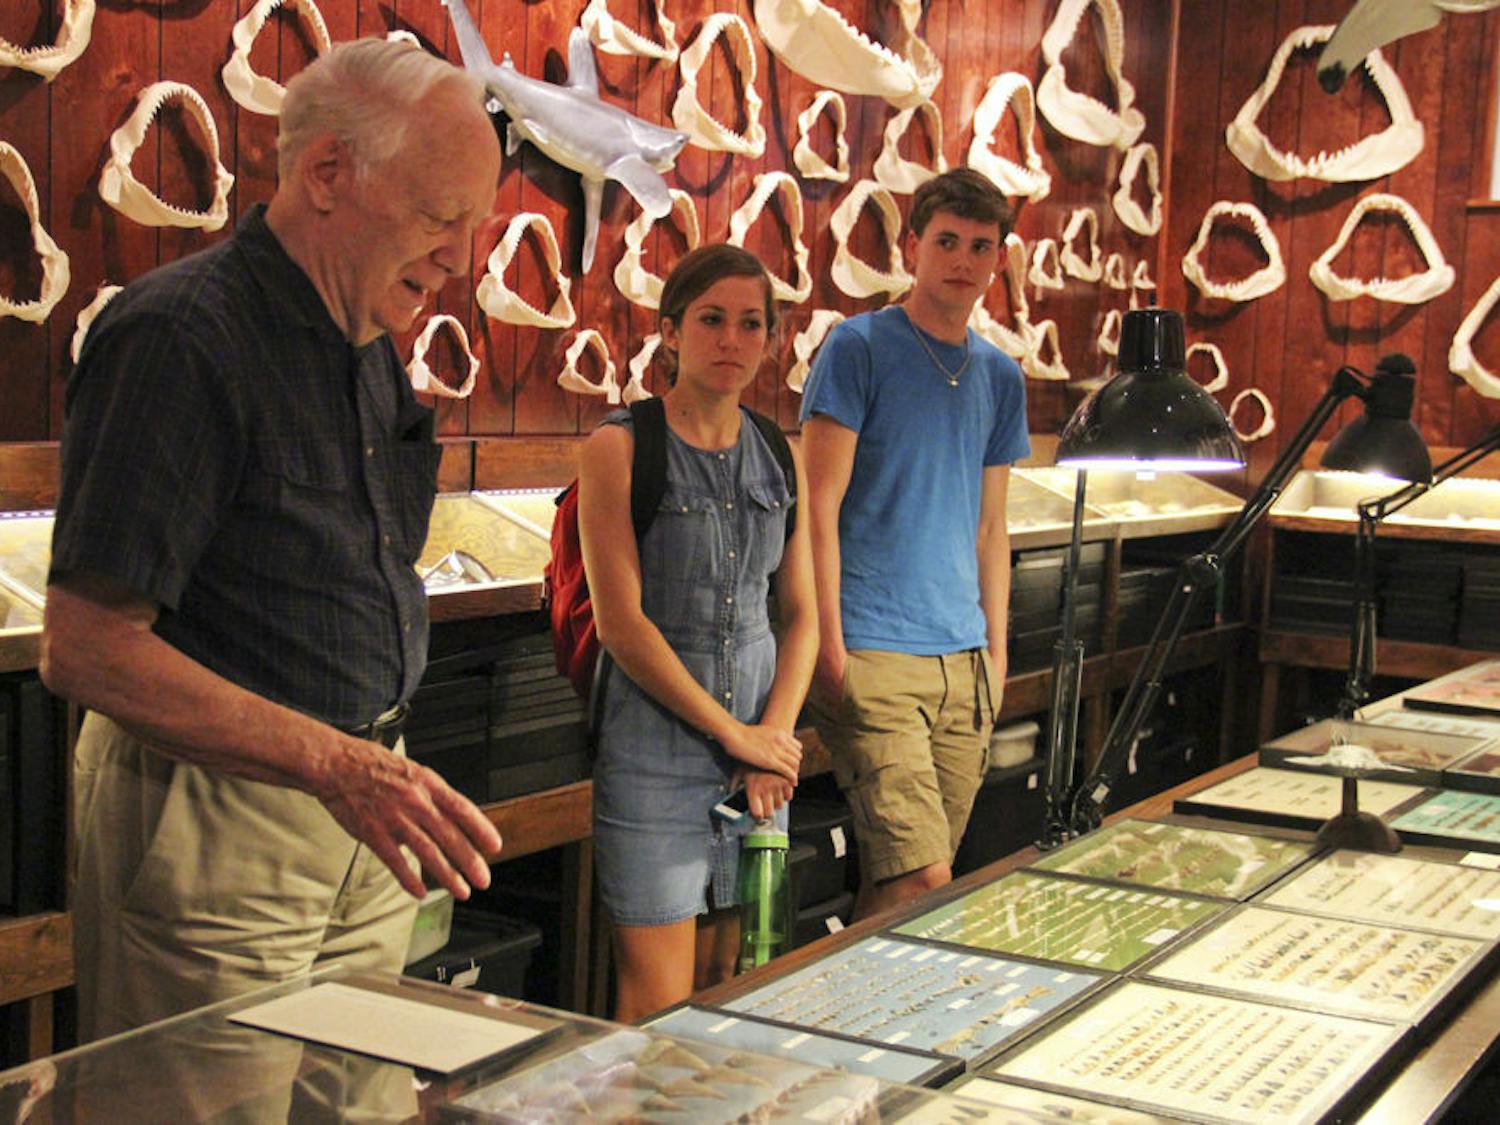 The UF Marine Biology Club visits the home of Dr. Gordon Hubbell, left, on Oct. 6, 2015. The amateur shark paleontologist's collection of shark teeth and jaws is one of the largest in the world.